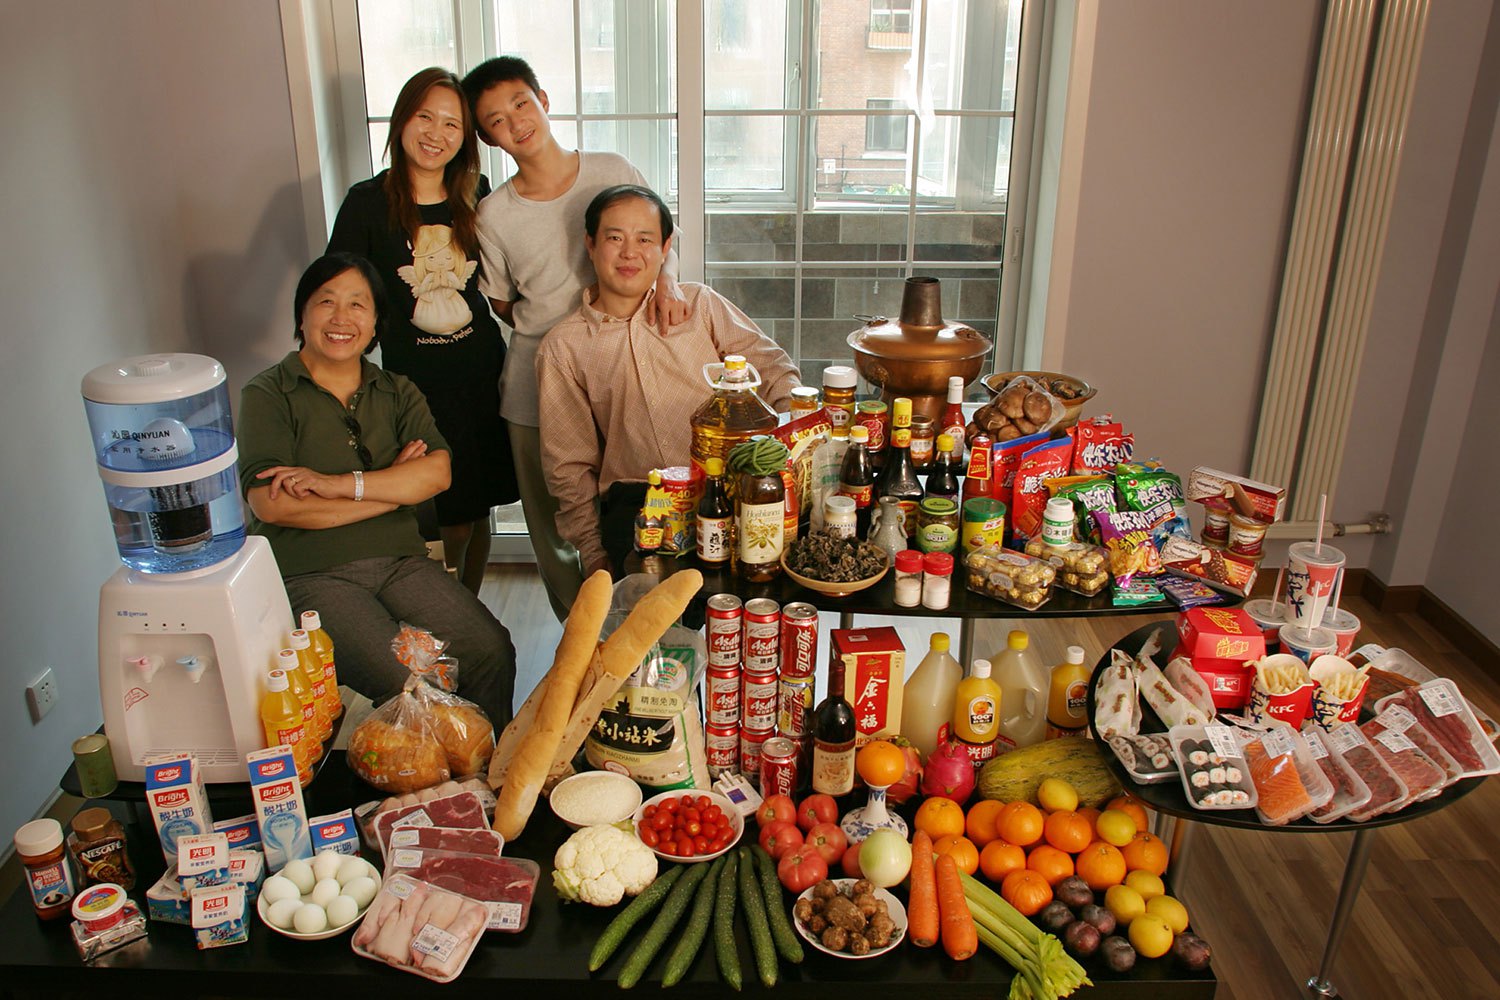 China: The Dong family of Beijing. Food expenditure for one week: 1,233.76 Yuan or $155.06. Favorite foods: fried shredded pork with sweet and sour sauce.